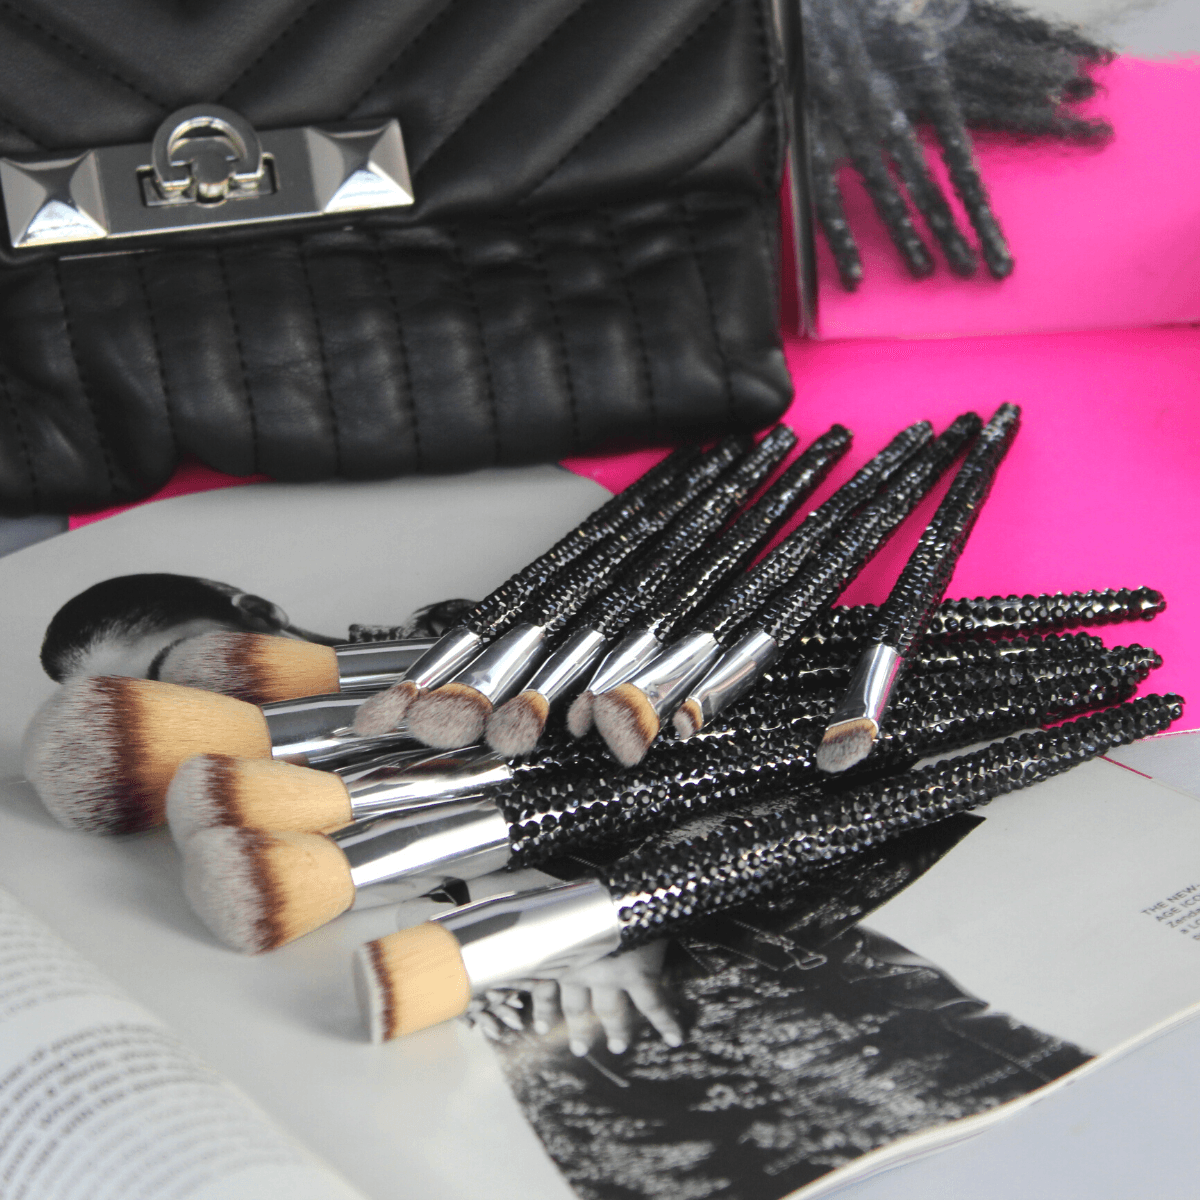 12 Piece Bling Rhinestone Makeup Brushes - She's A Beat Beauty